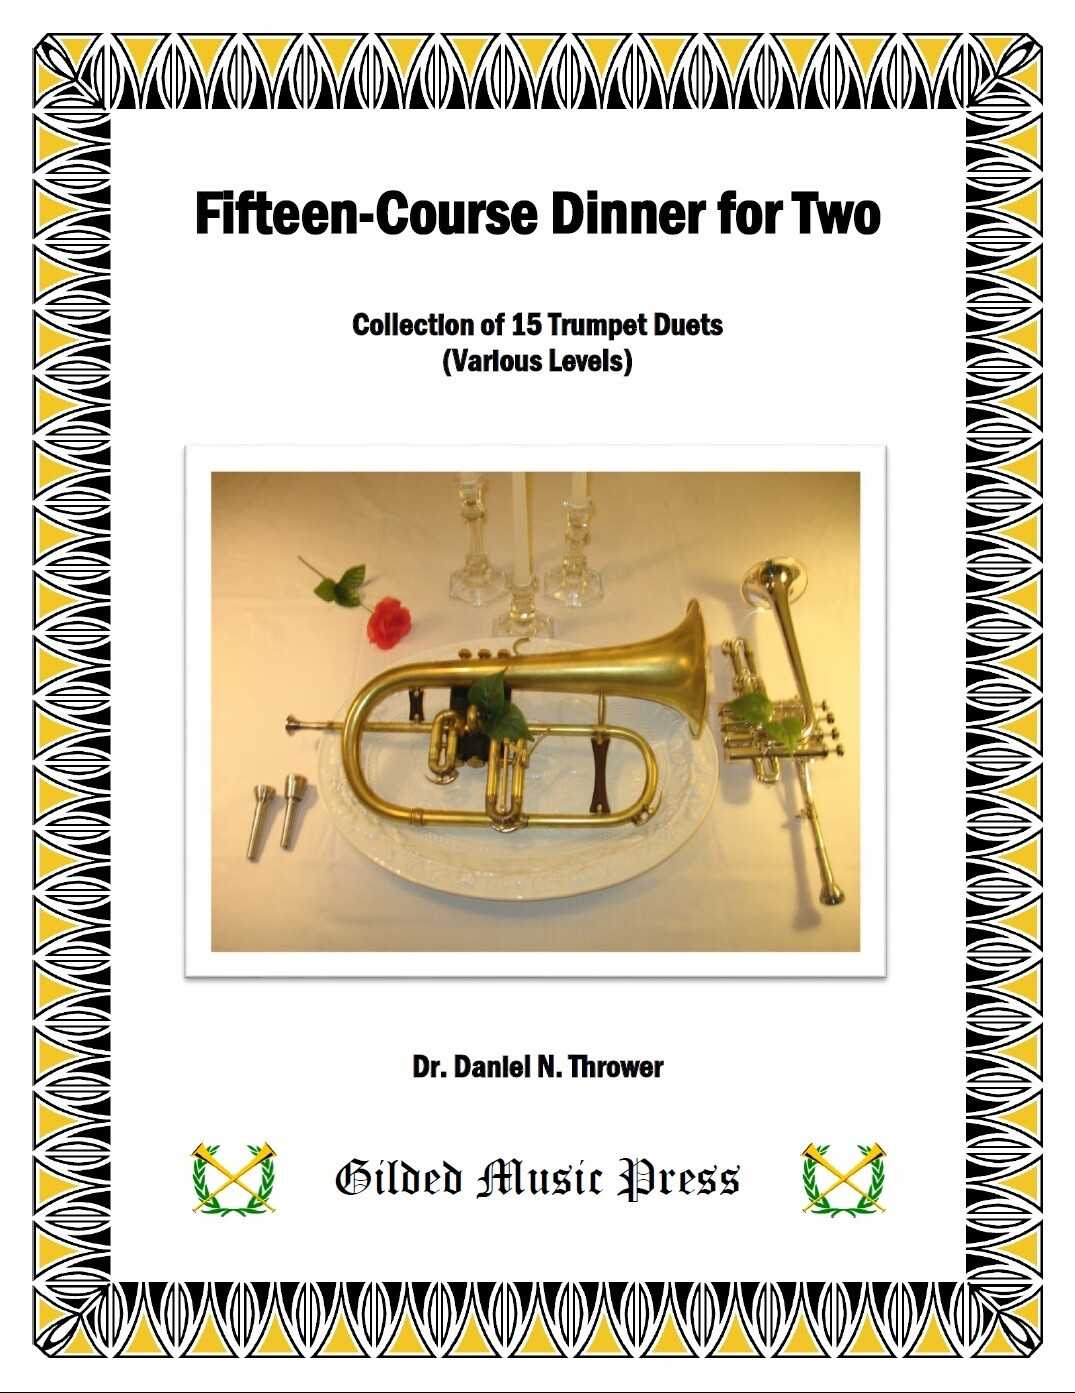 GMP 2021: Fifteen-Course Dinner for Two (15 Duets), Dr. Daniel Thrower